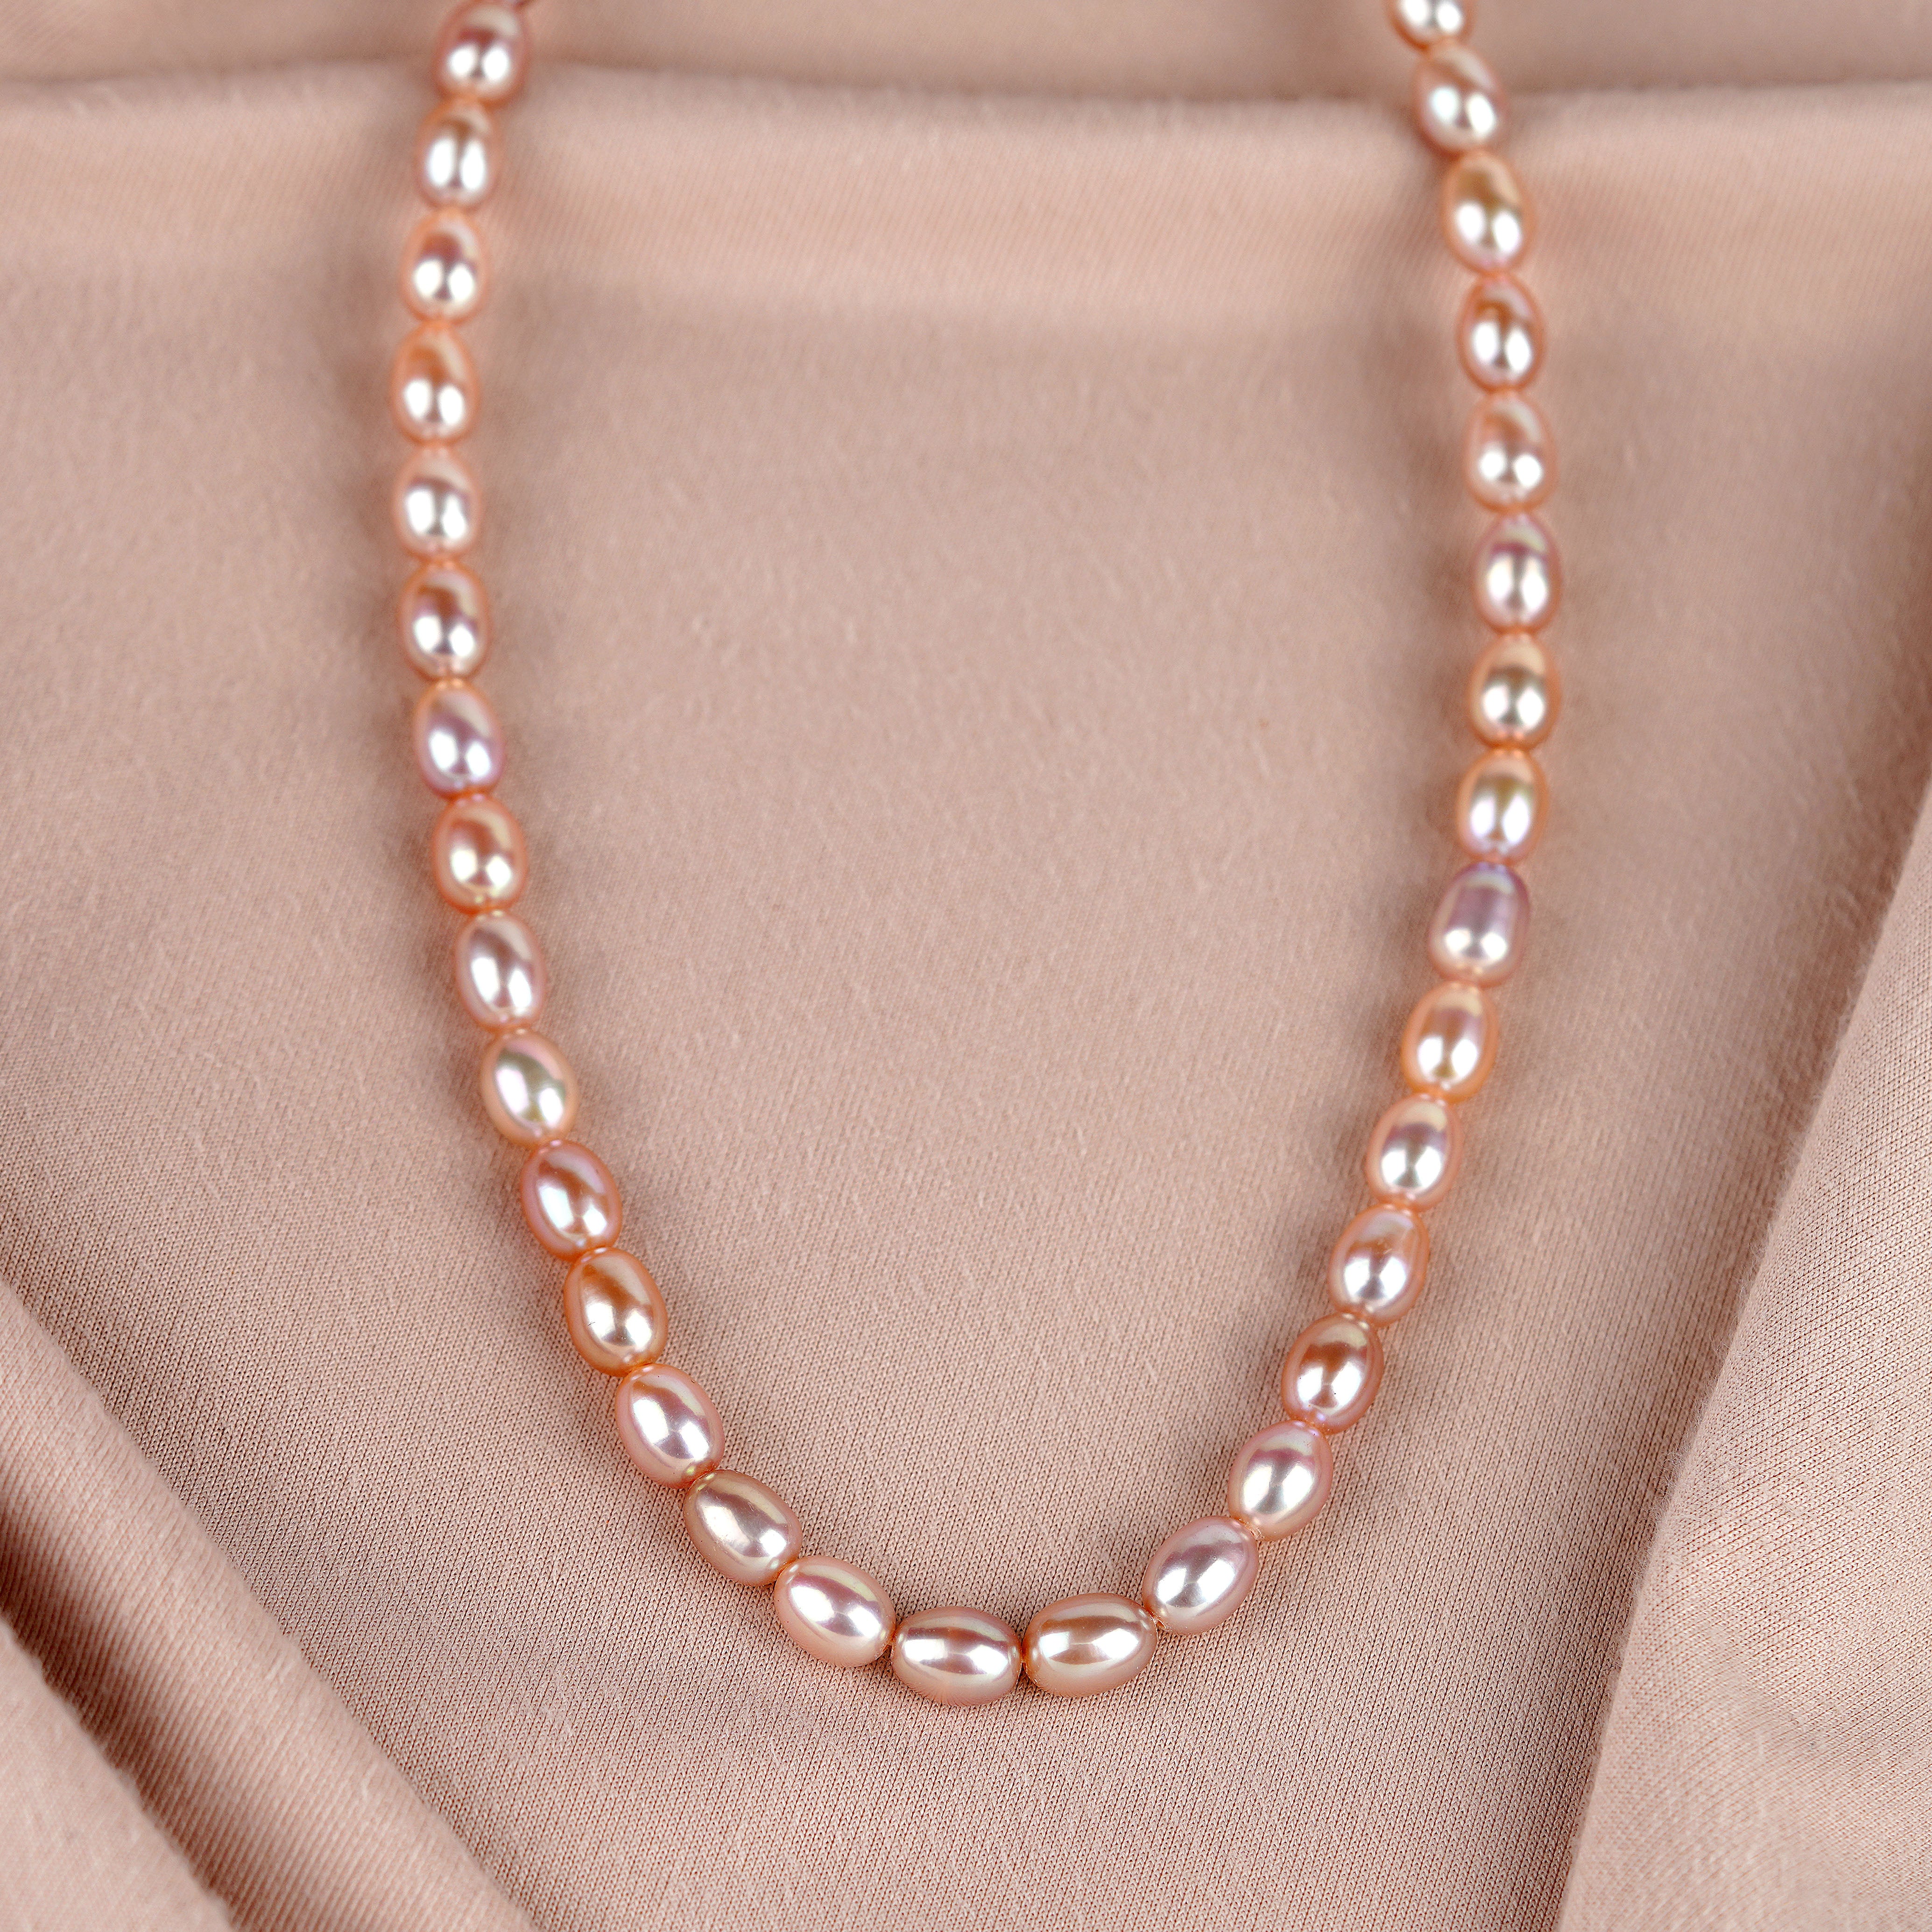 Single Line Pearl Necklace in Peach Blossom - Krishna Jewellers Pearls and Gems